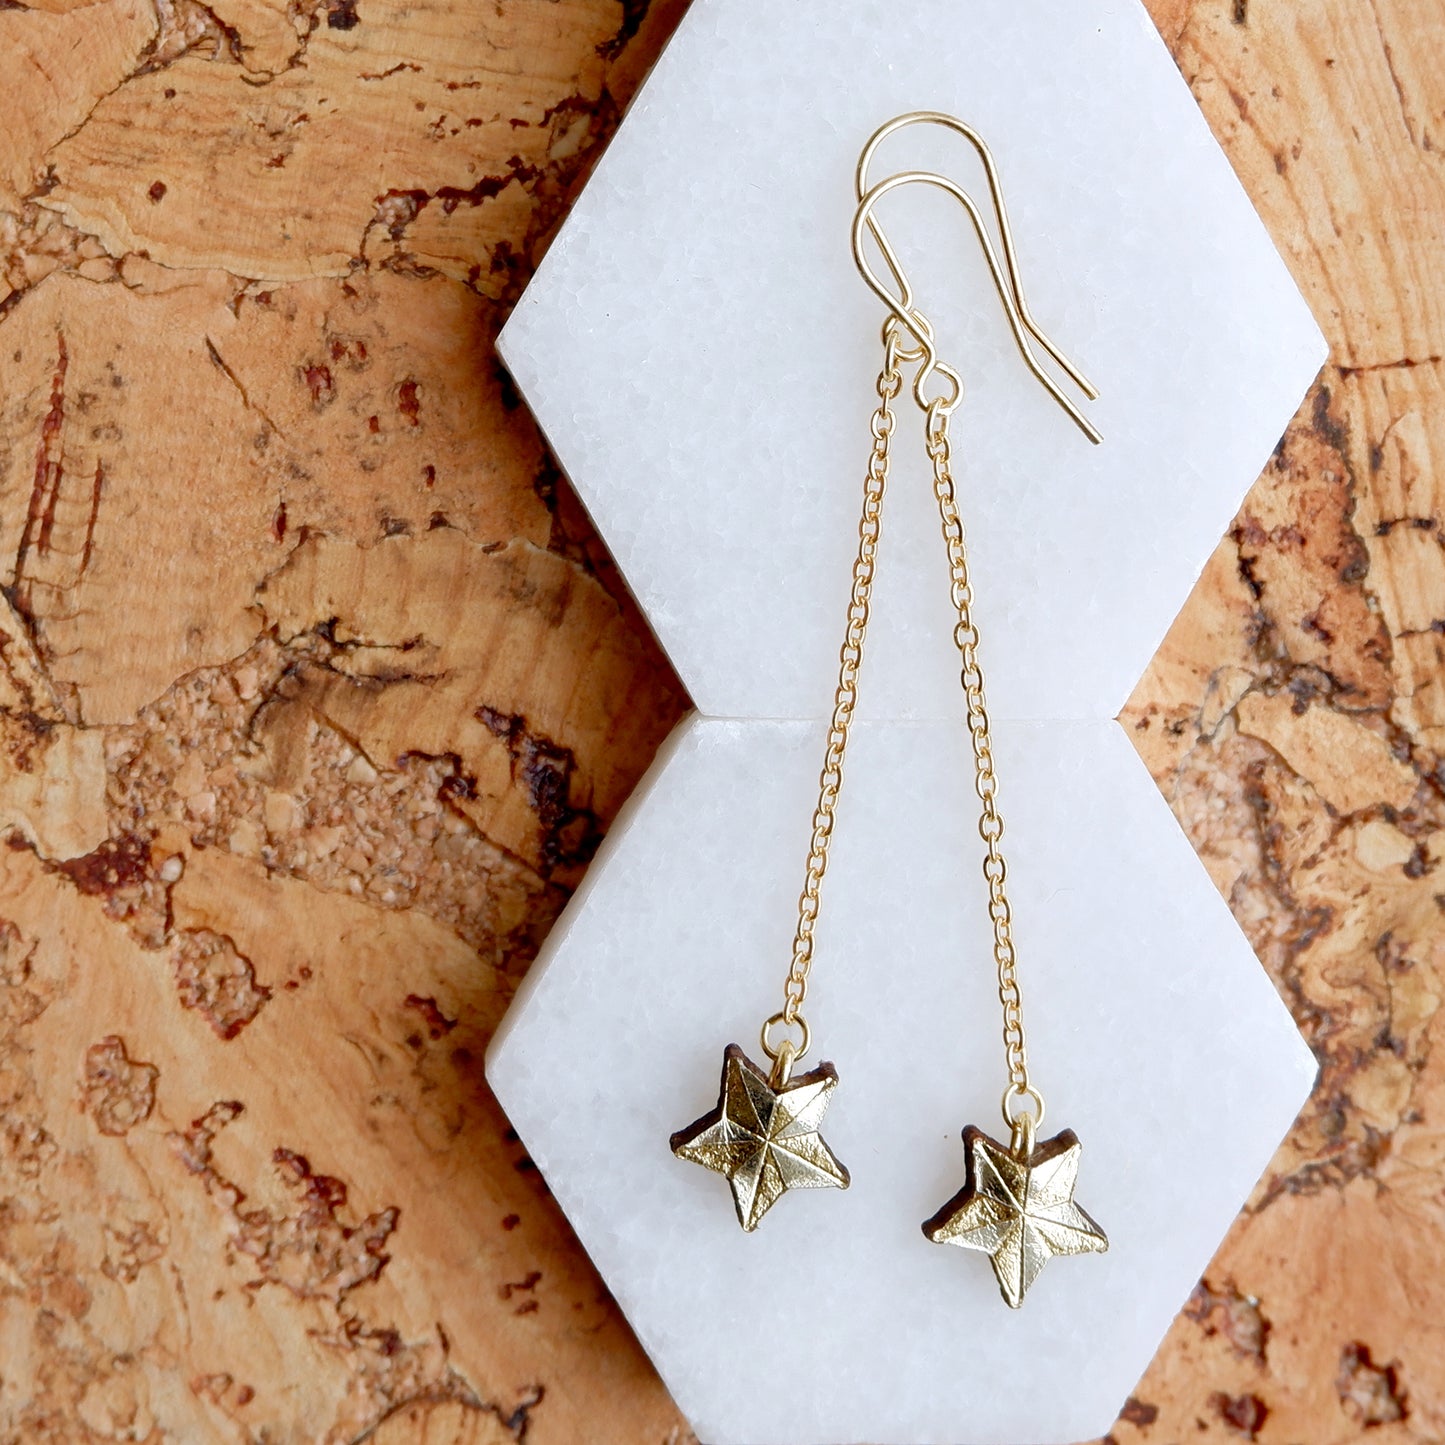 tiny gold leather star drop earrings